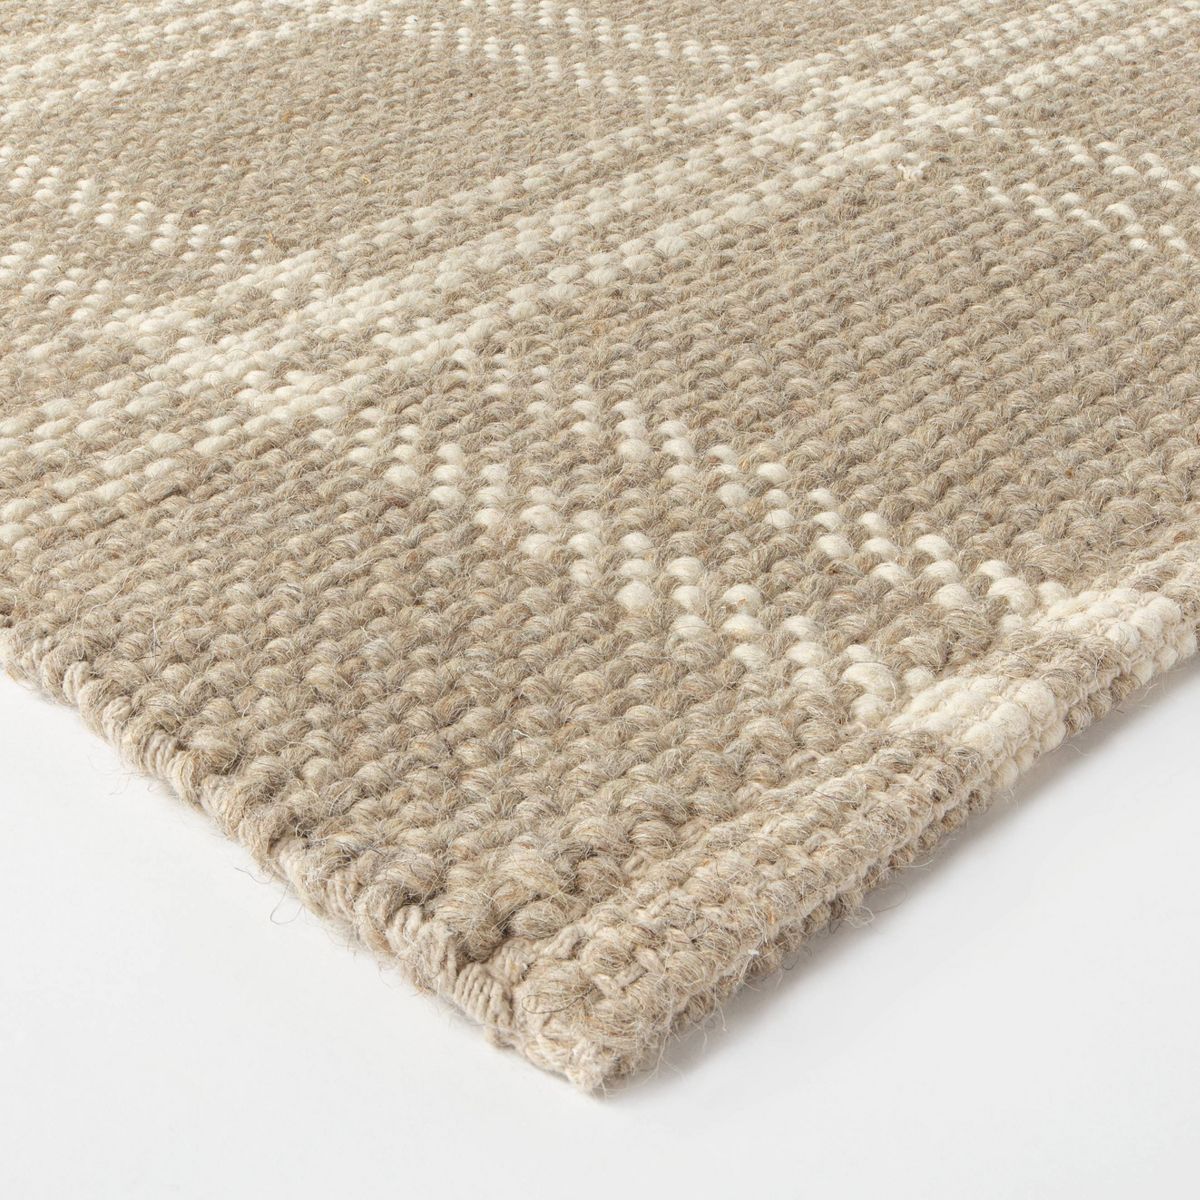 5'x7' Cottonwood Plaid Wool/Cotton Area Rug Neutral - Threshold™ designed with Studio McGee | Target